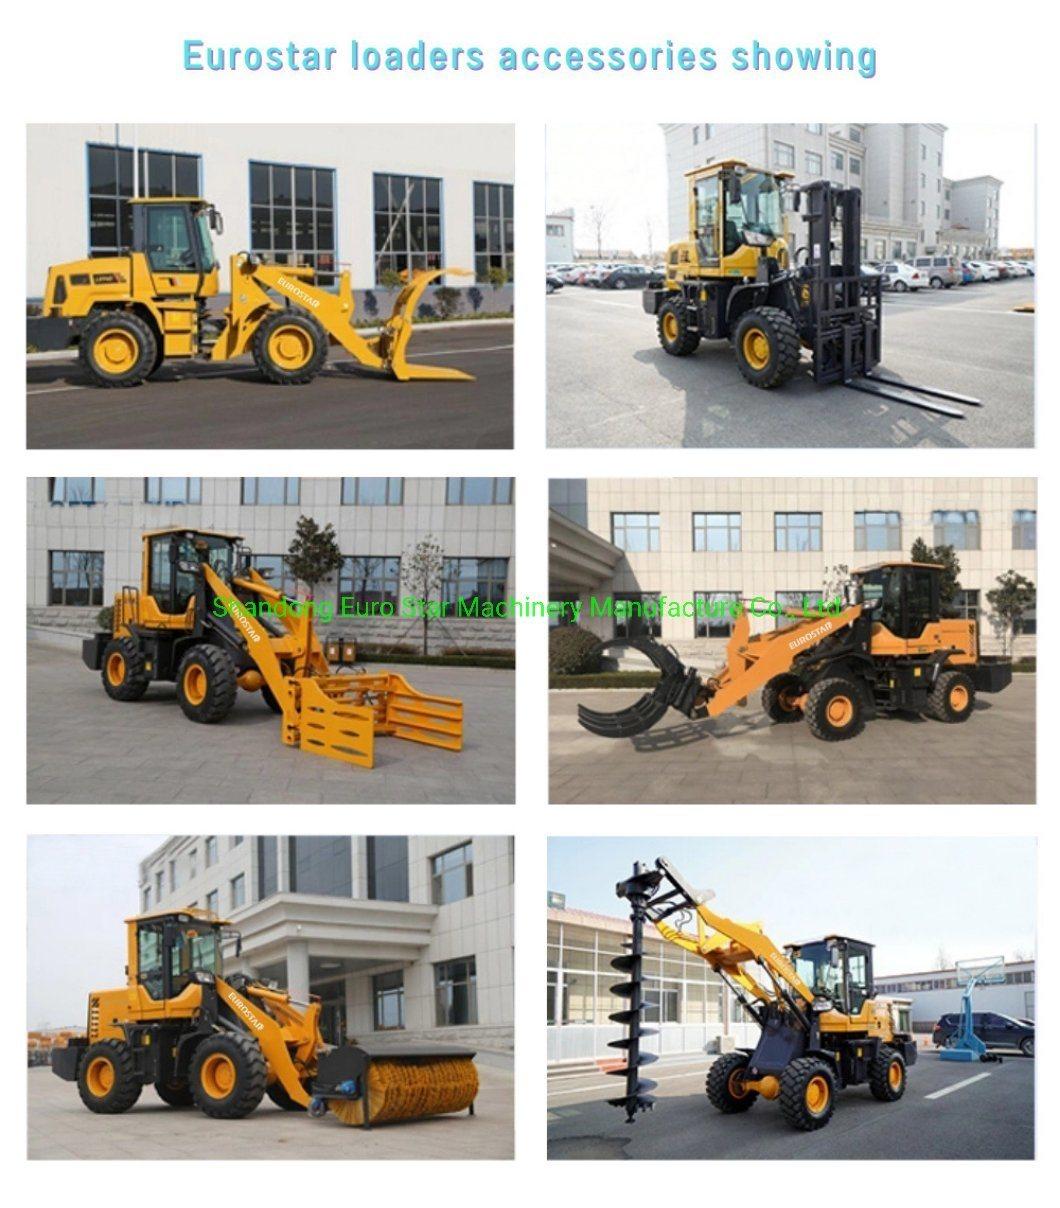 Mini Loader Small Articulated Front End Wheel Loader Construction Machinery Made in China for Bulk Materials and Hard Materials 1.6t 1.8t 2.0t